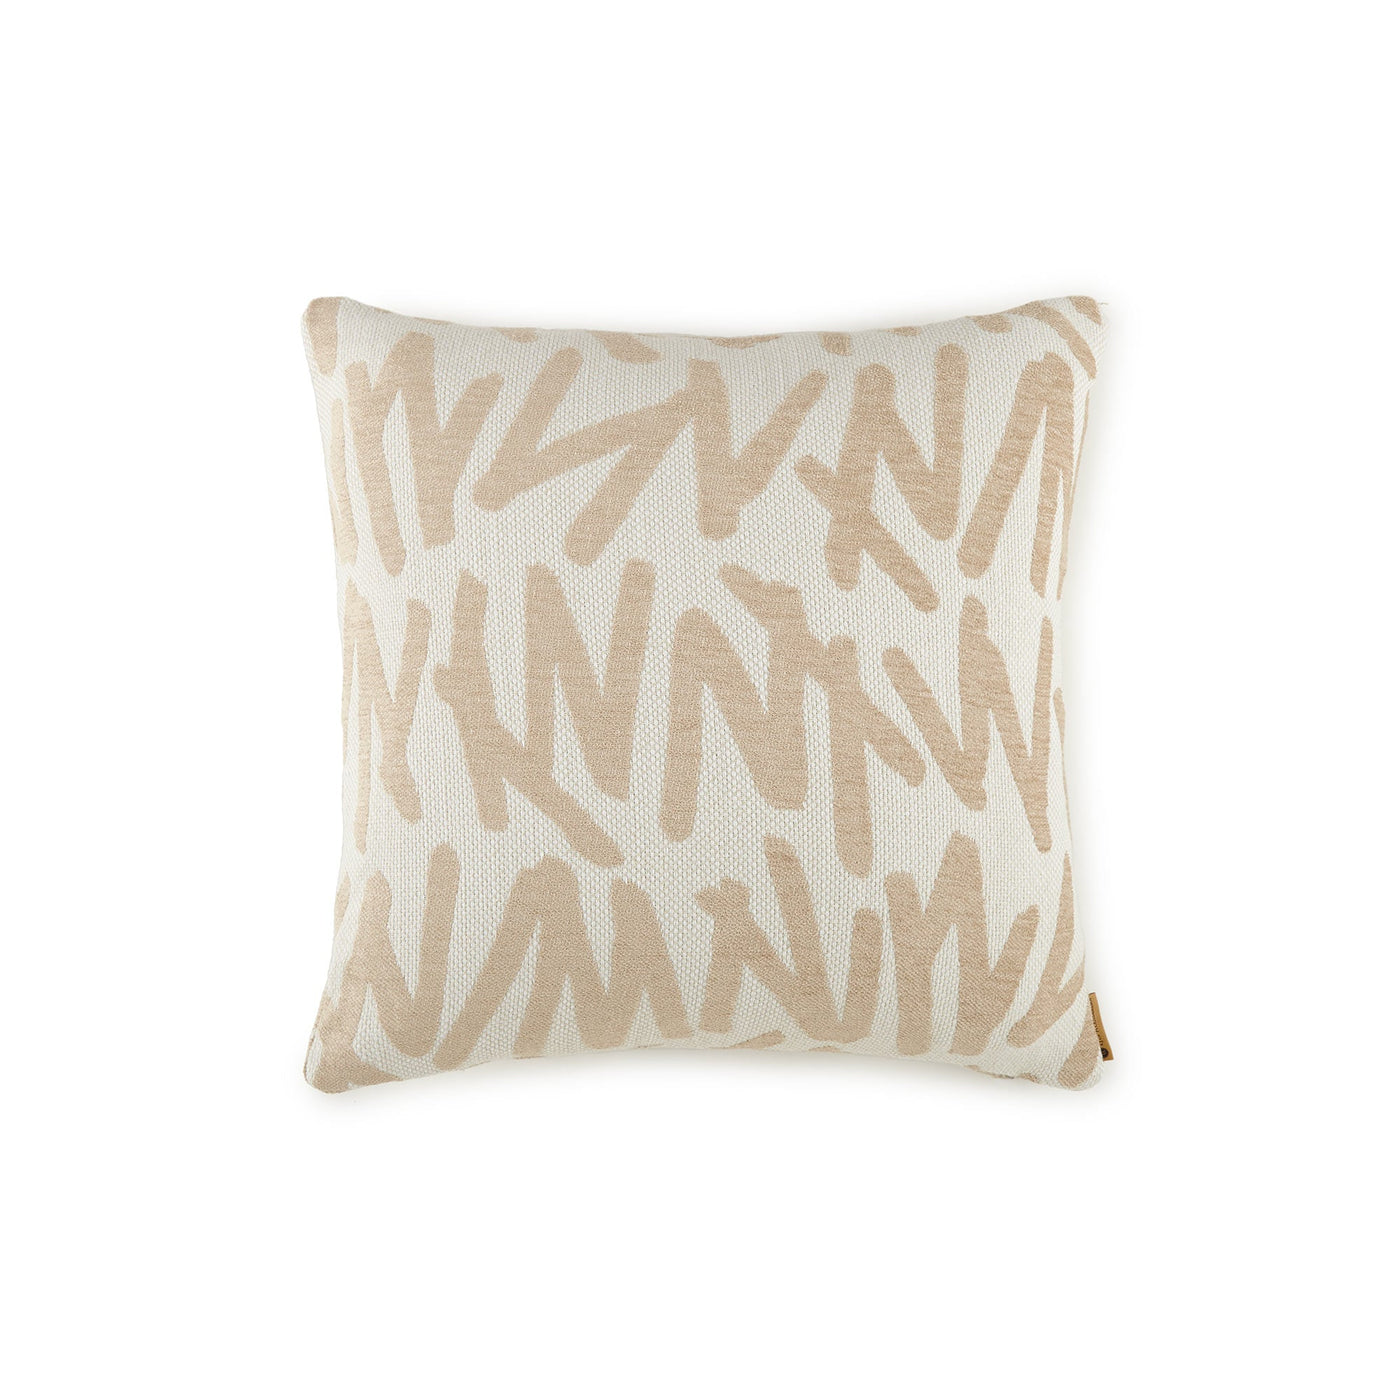 Tolentino Alabaster Long Rectangle Pillow (18x46)